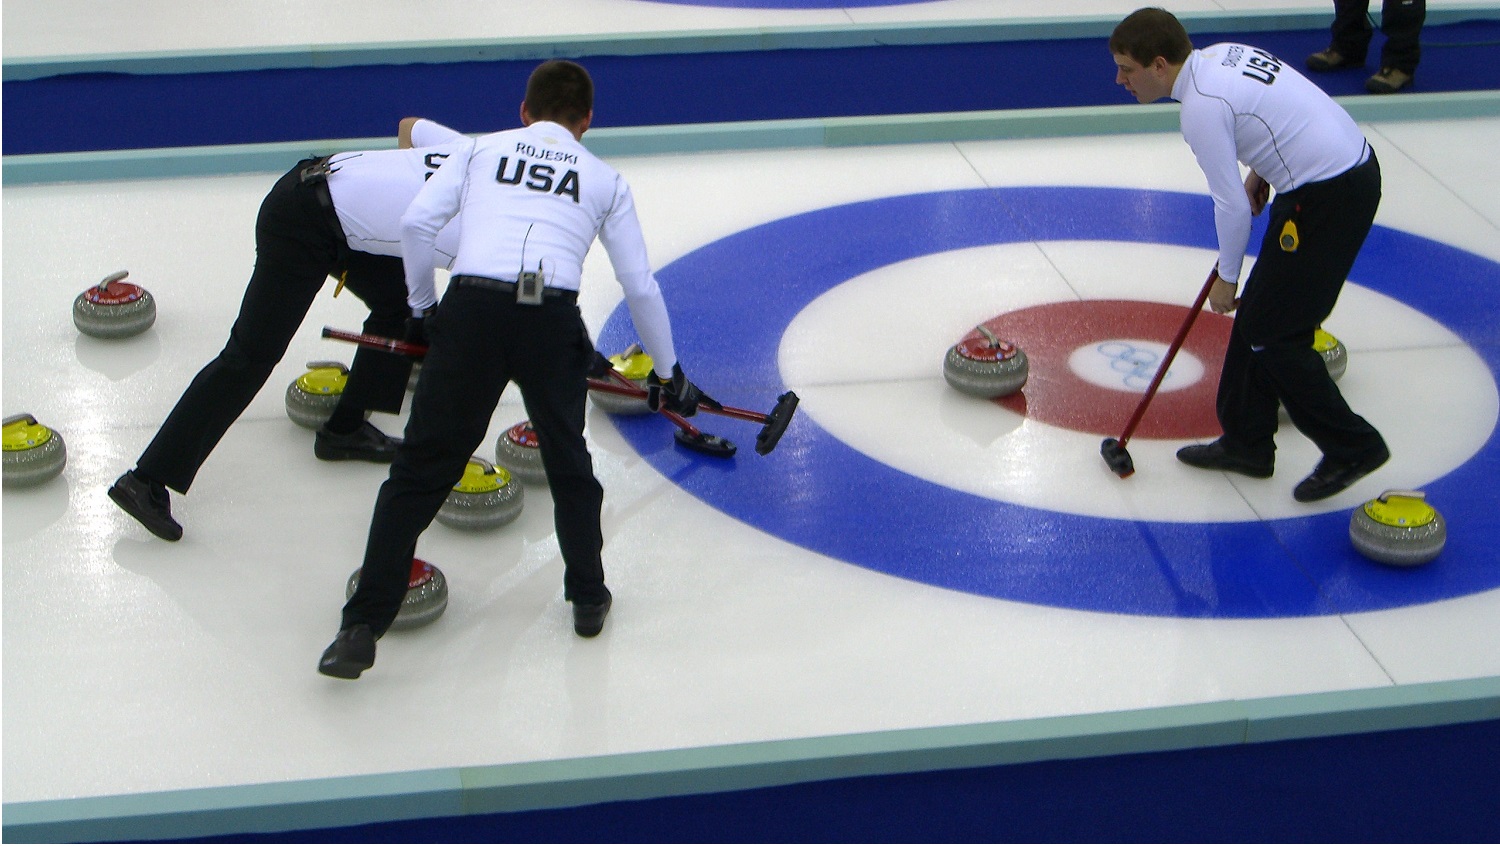 Curling USA Team Members on the Ice - USA Curling Partners with NC State to Conduct National Survey - Parks Recreation and Tourism Management